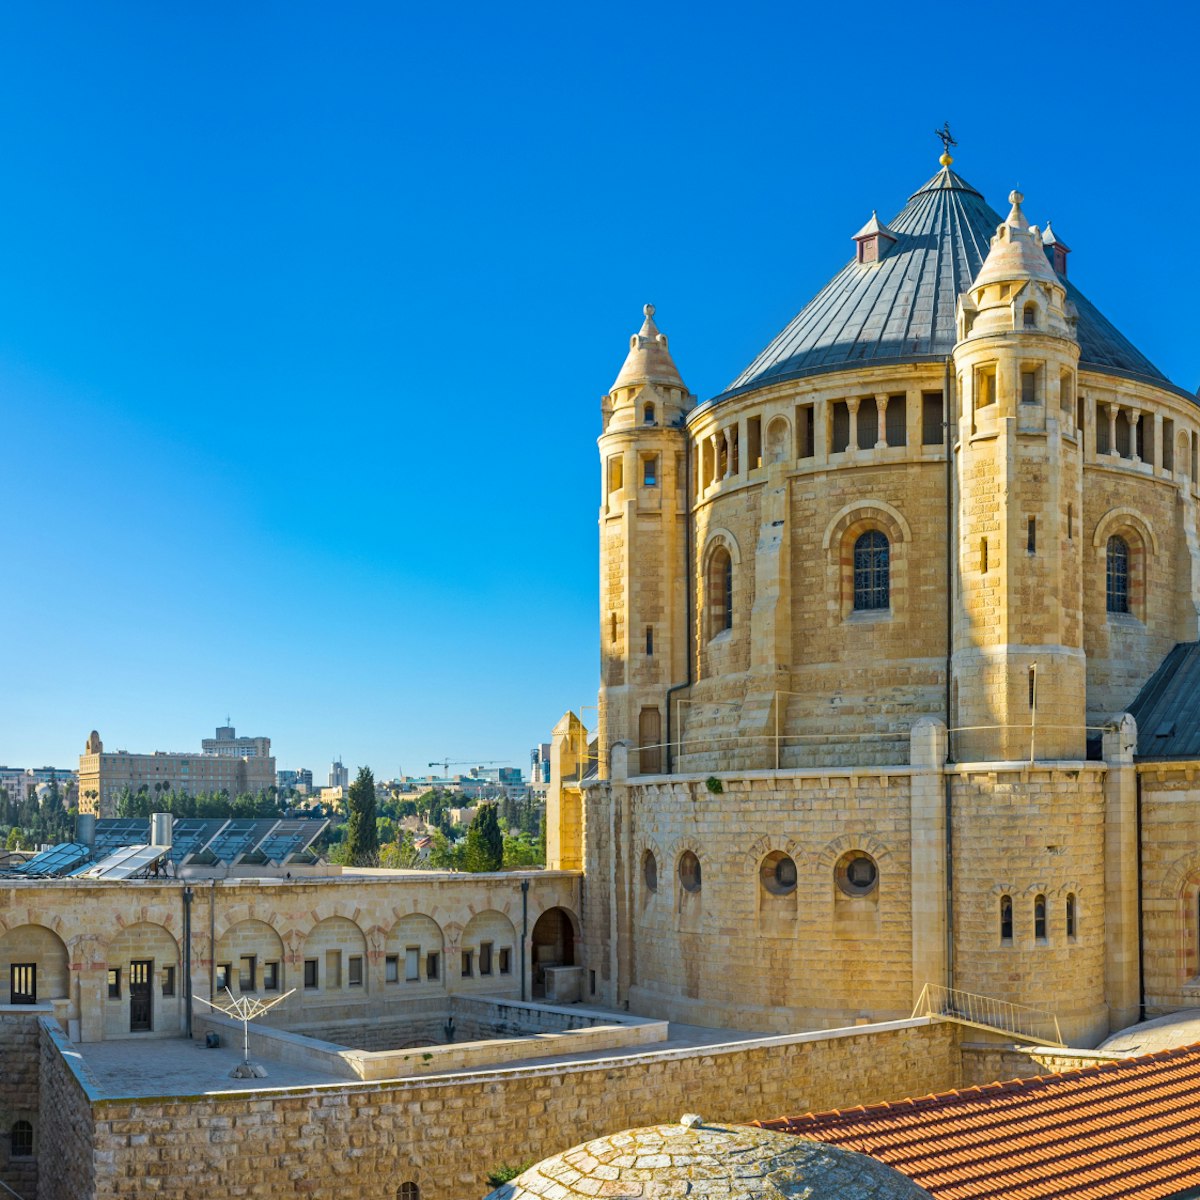 The house roofs are the best viewpoint, overlooking the huge building of the Dormition Abbey, with its clock tower and tiny belfries, Jerusalem, Israel.